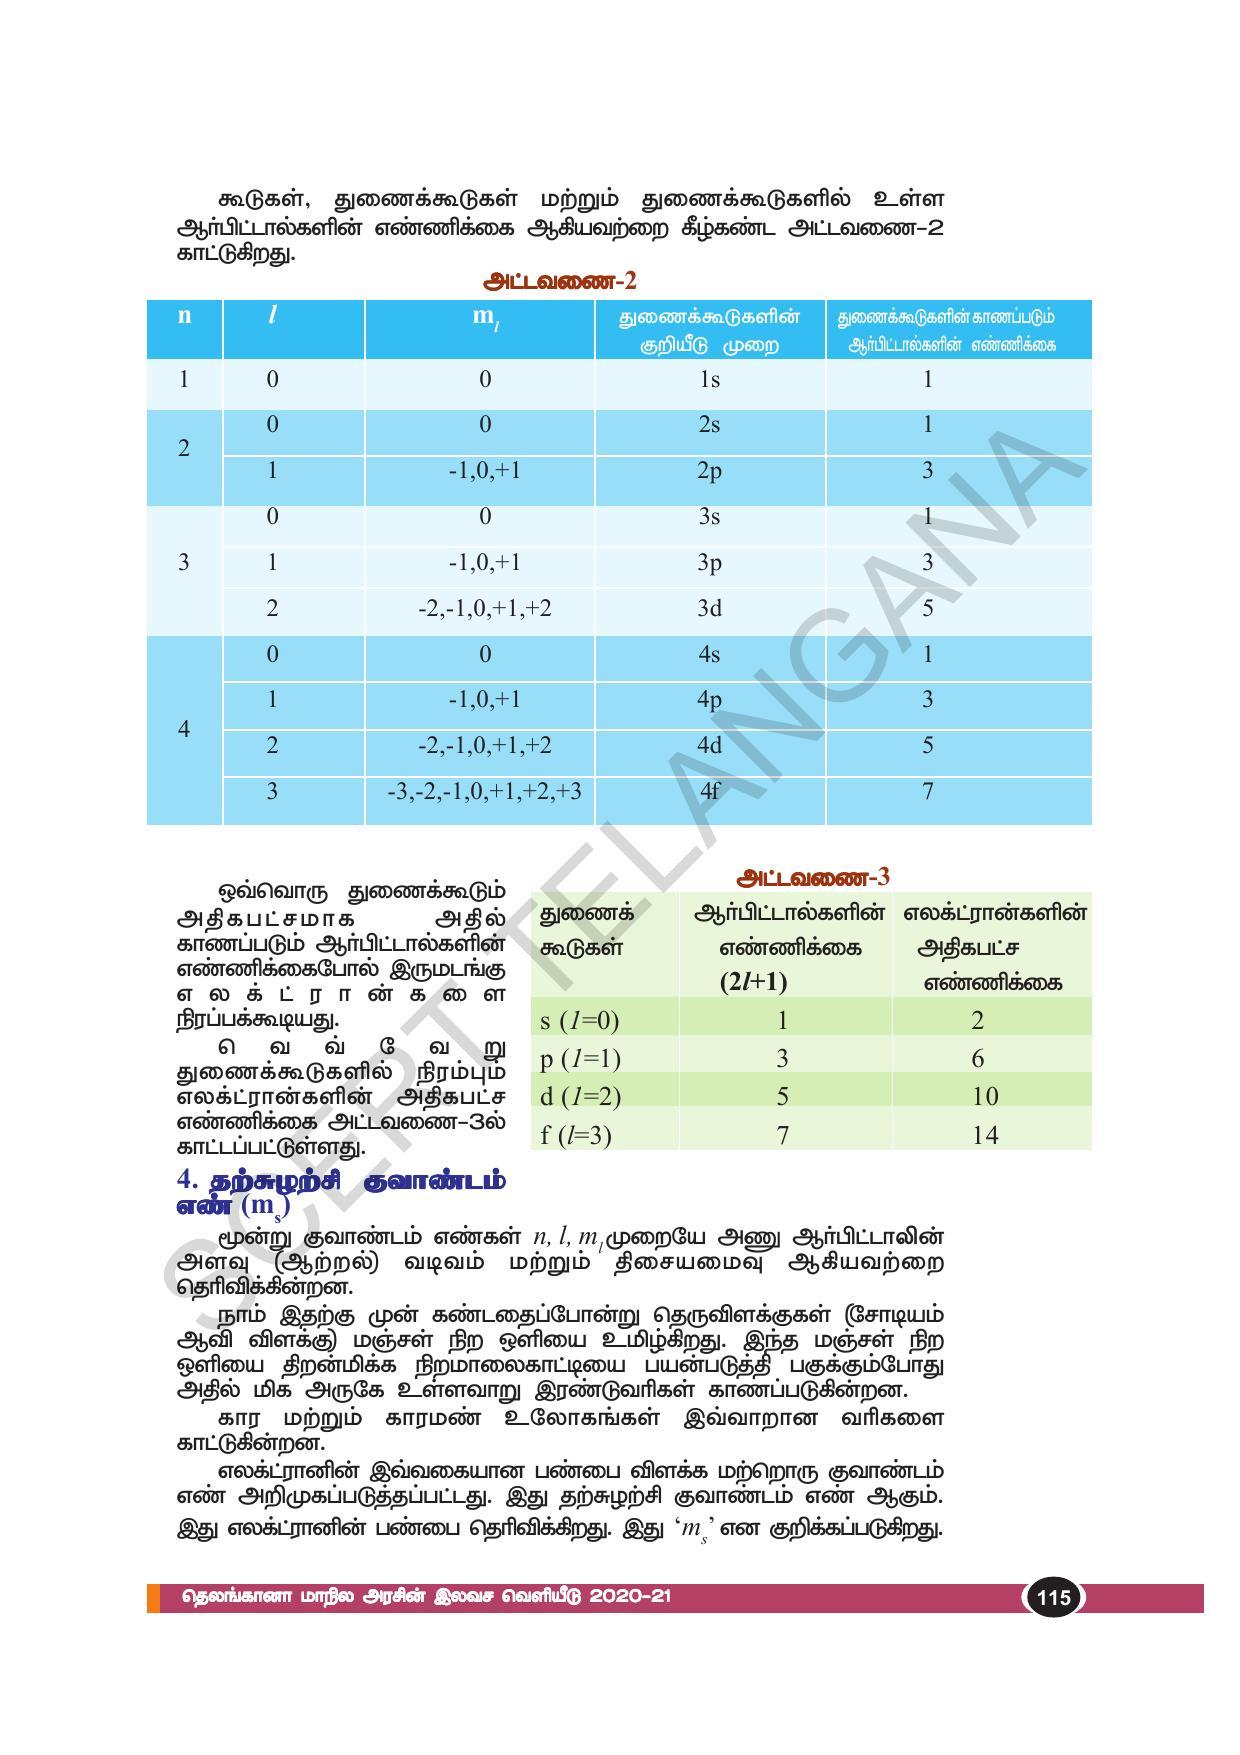 TS SCERT Class 10 Physical Science(Tamil Medium) Text Book - Page 127